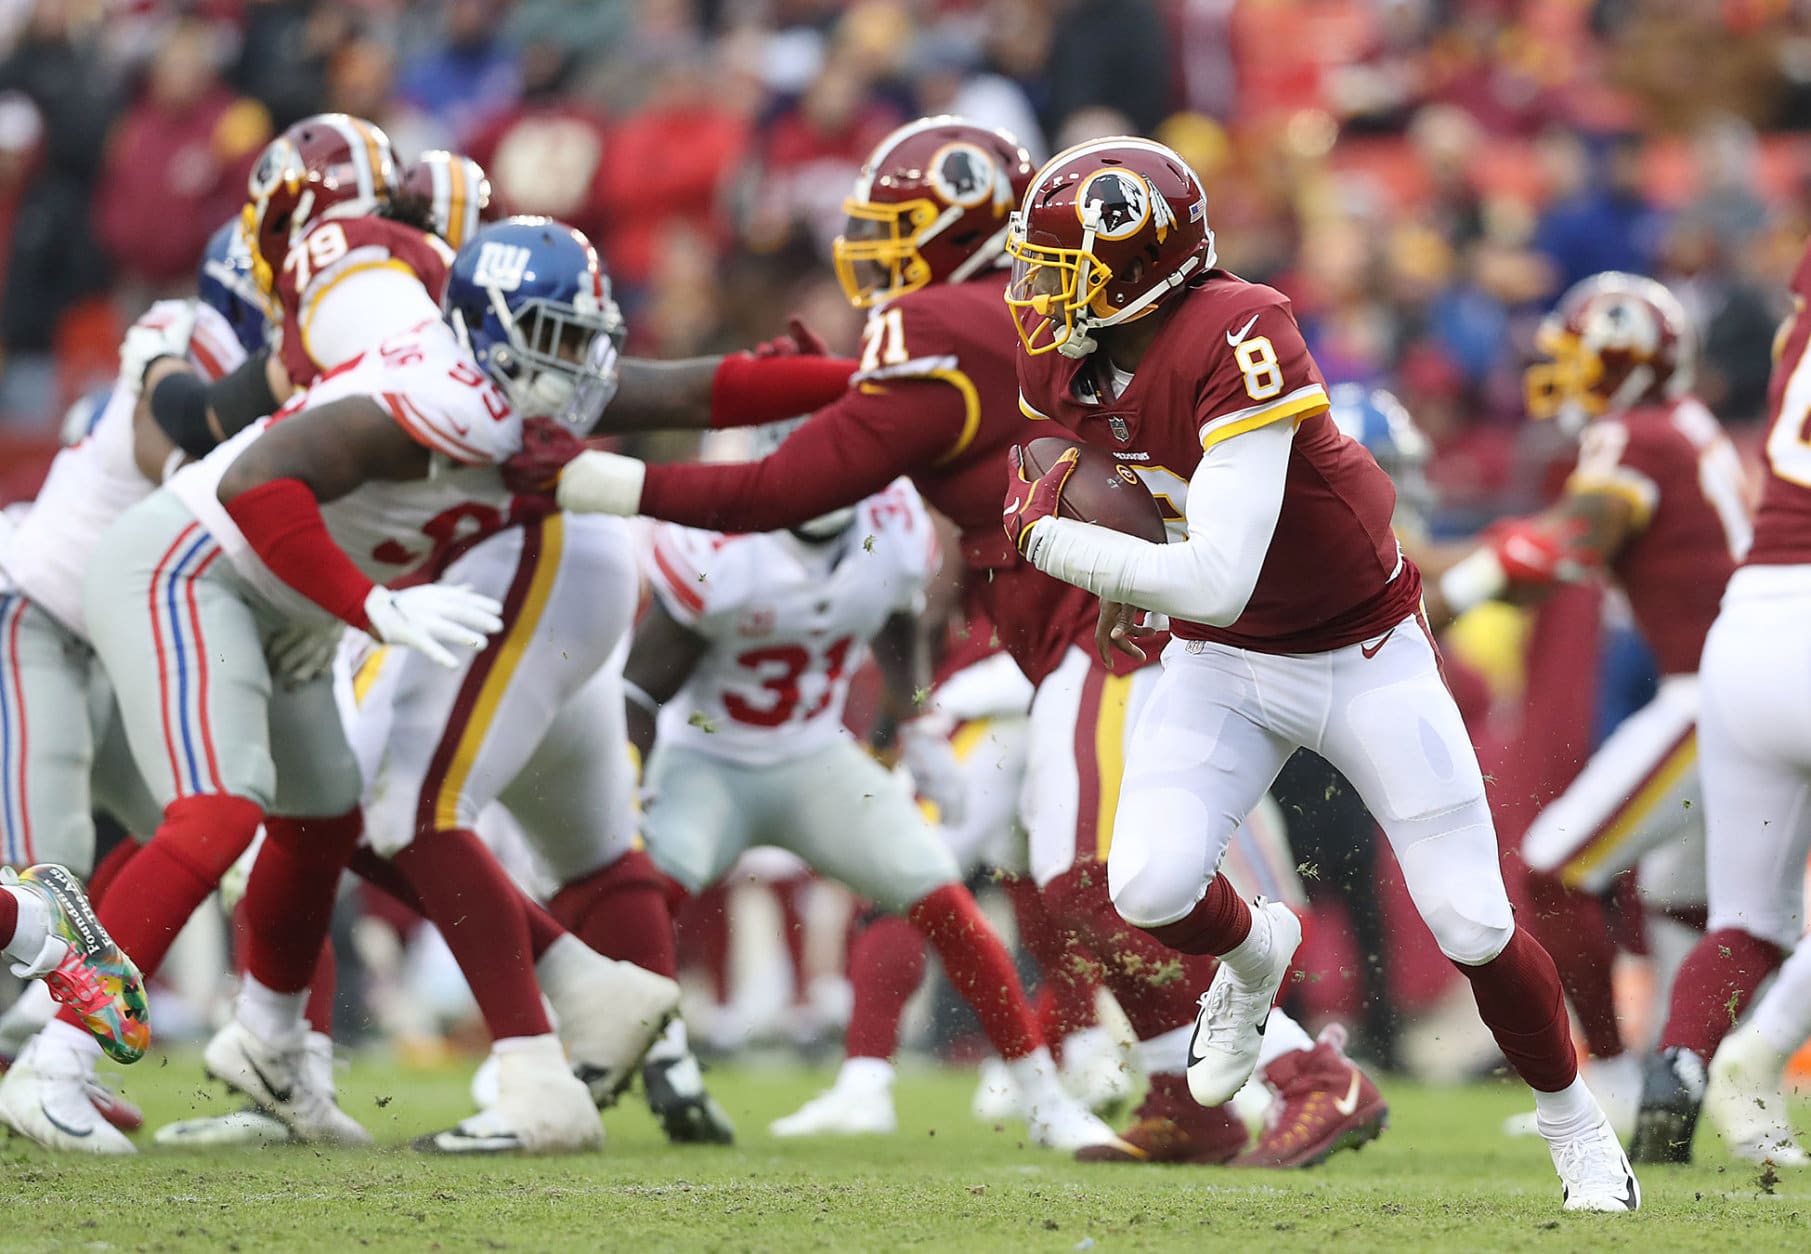 LANDOVER, MD - DECEMBER 09: Quarterback Josh Johnson #8 of the Washington Redskins carries the ball in the fourth quarter against the New York Giants at FedExField on December 9, 2018 in Landover, Maryland. (Photo by Rob Carr/Getty Images)